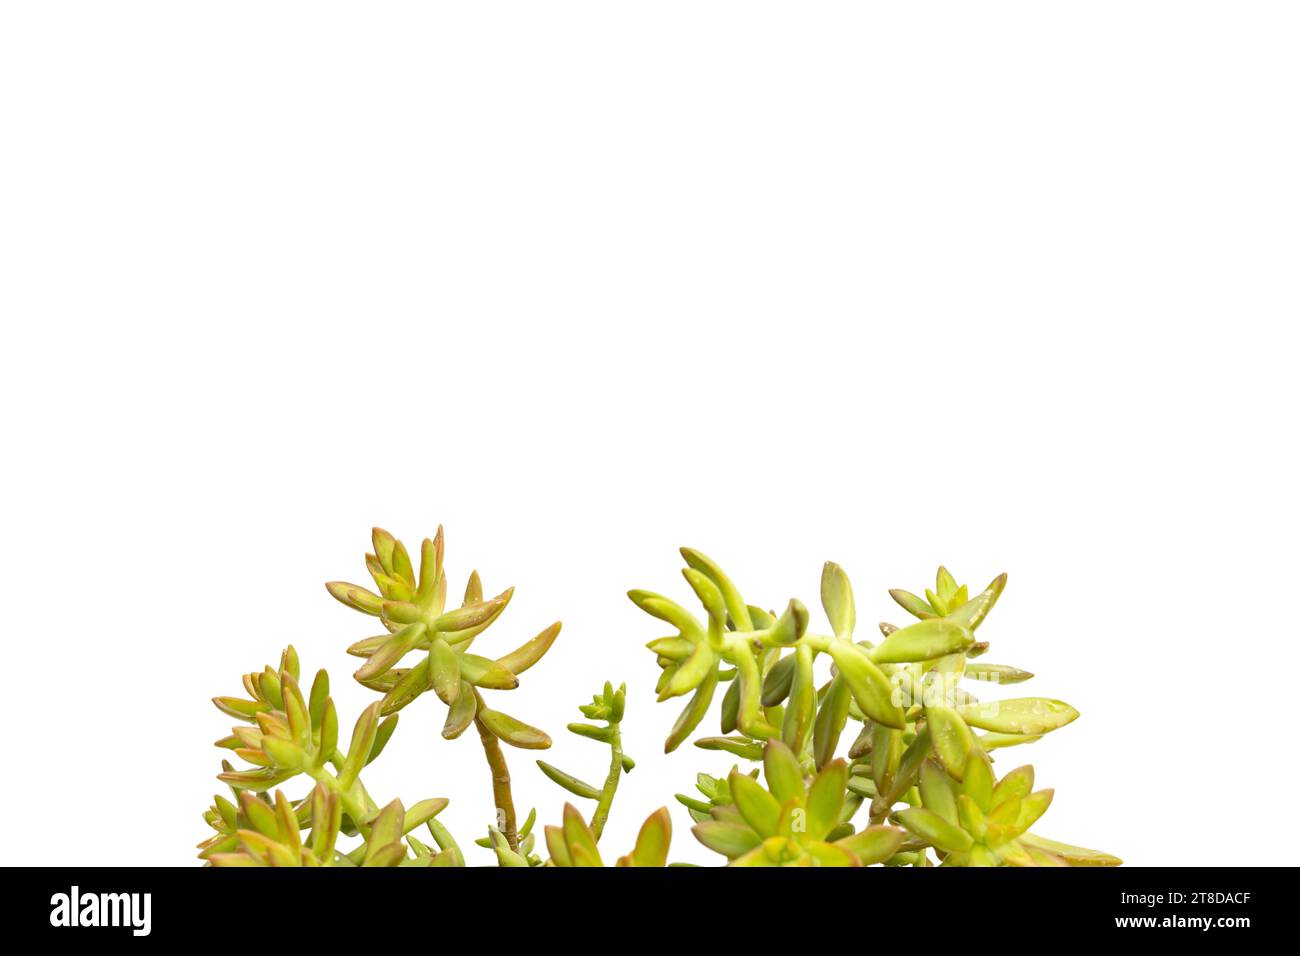 Sedum adilphii copperstone with blank space for text Stock Photo